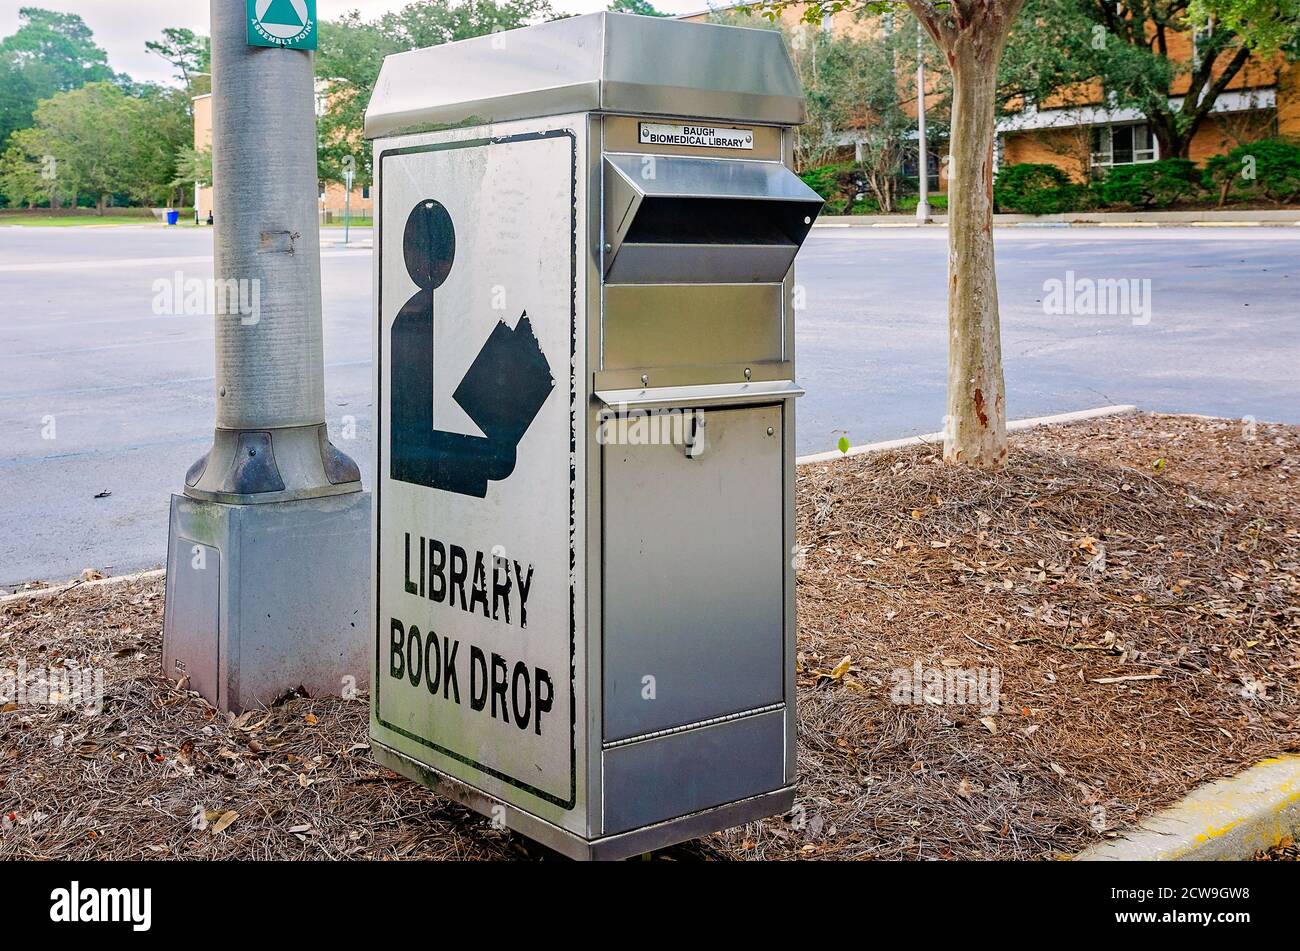 A library book drop offers an easy return of library books at the University of South Alabama, Sept. 26, 2020, in Mobile, Alabama. Stock Photo